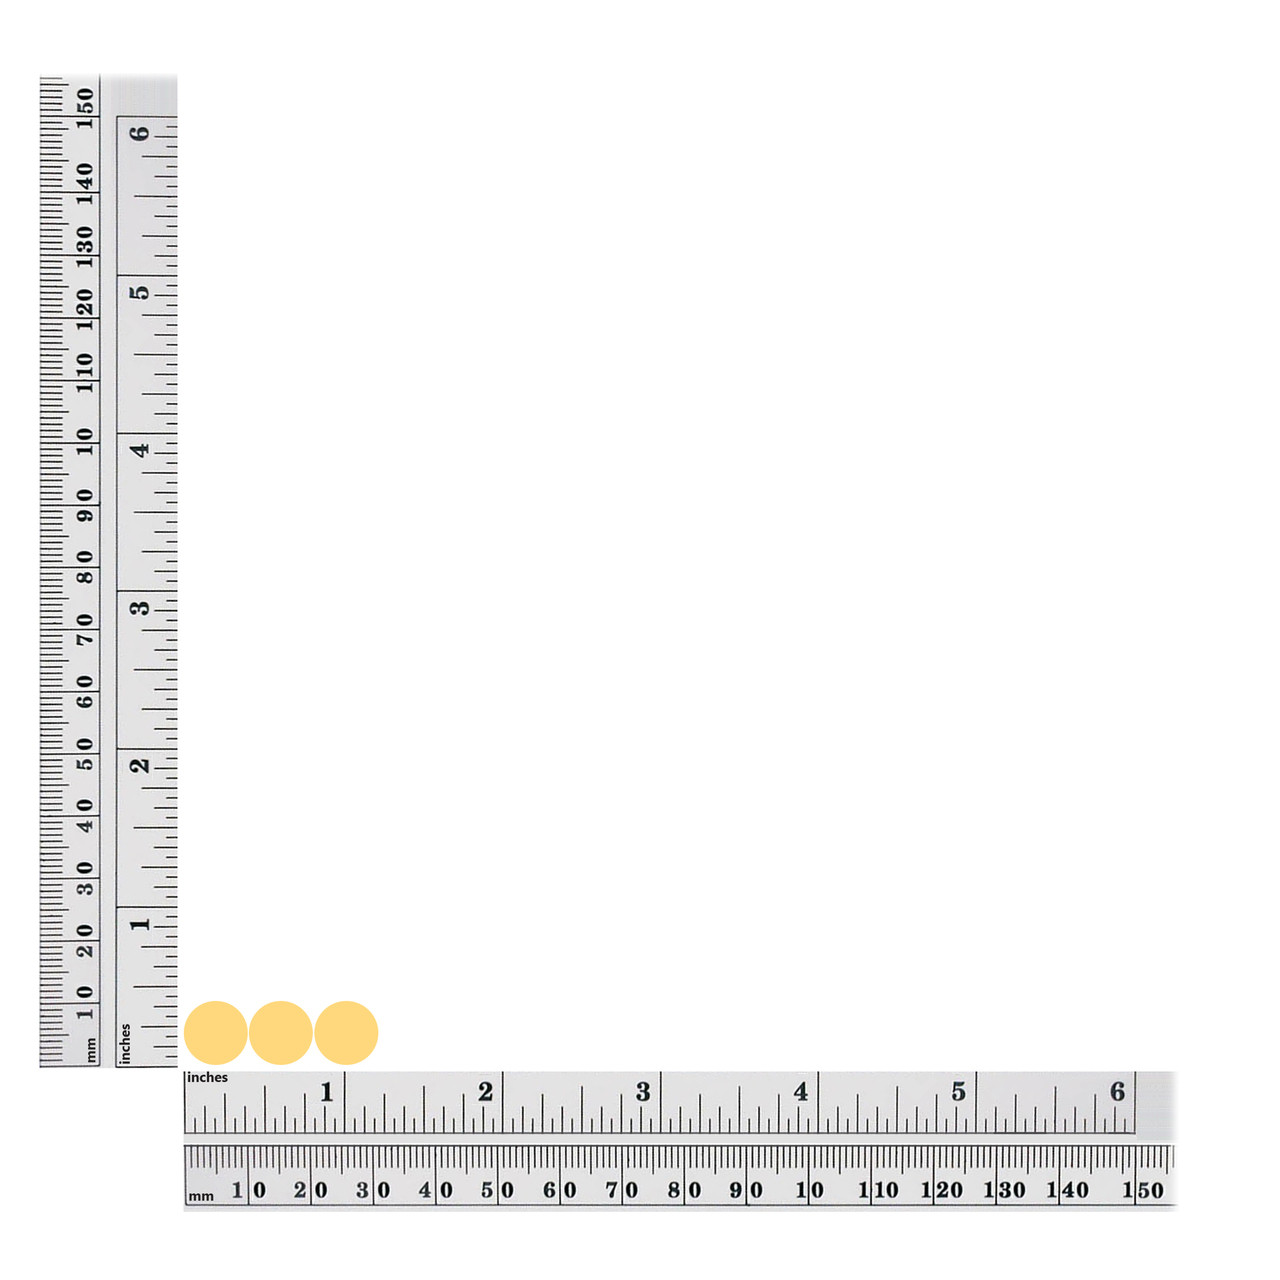 10mm sequin size chart